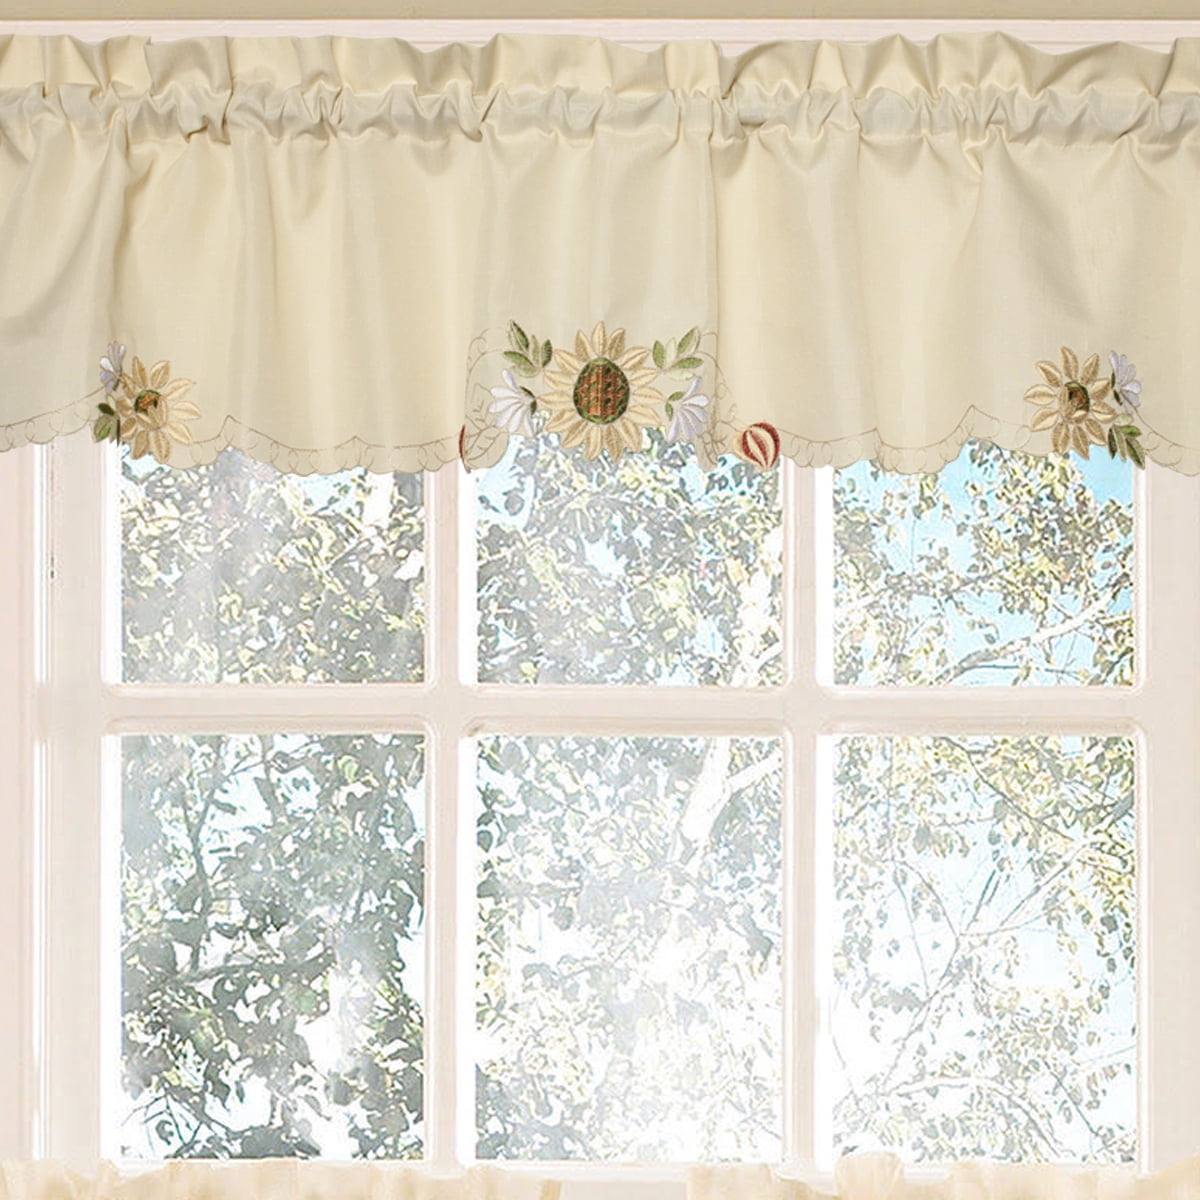 60 by 12-Inch LORRAINE HOME FASHIONS by The Sea Valance 